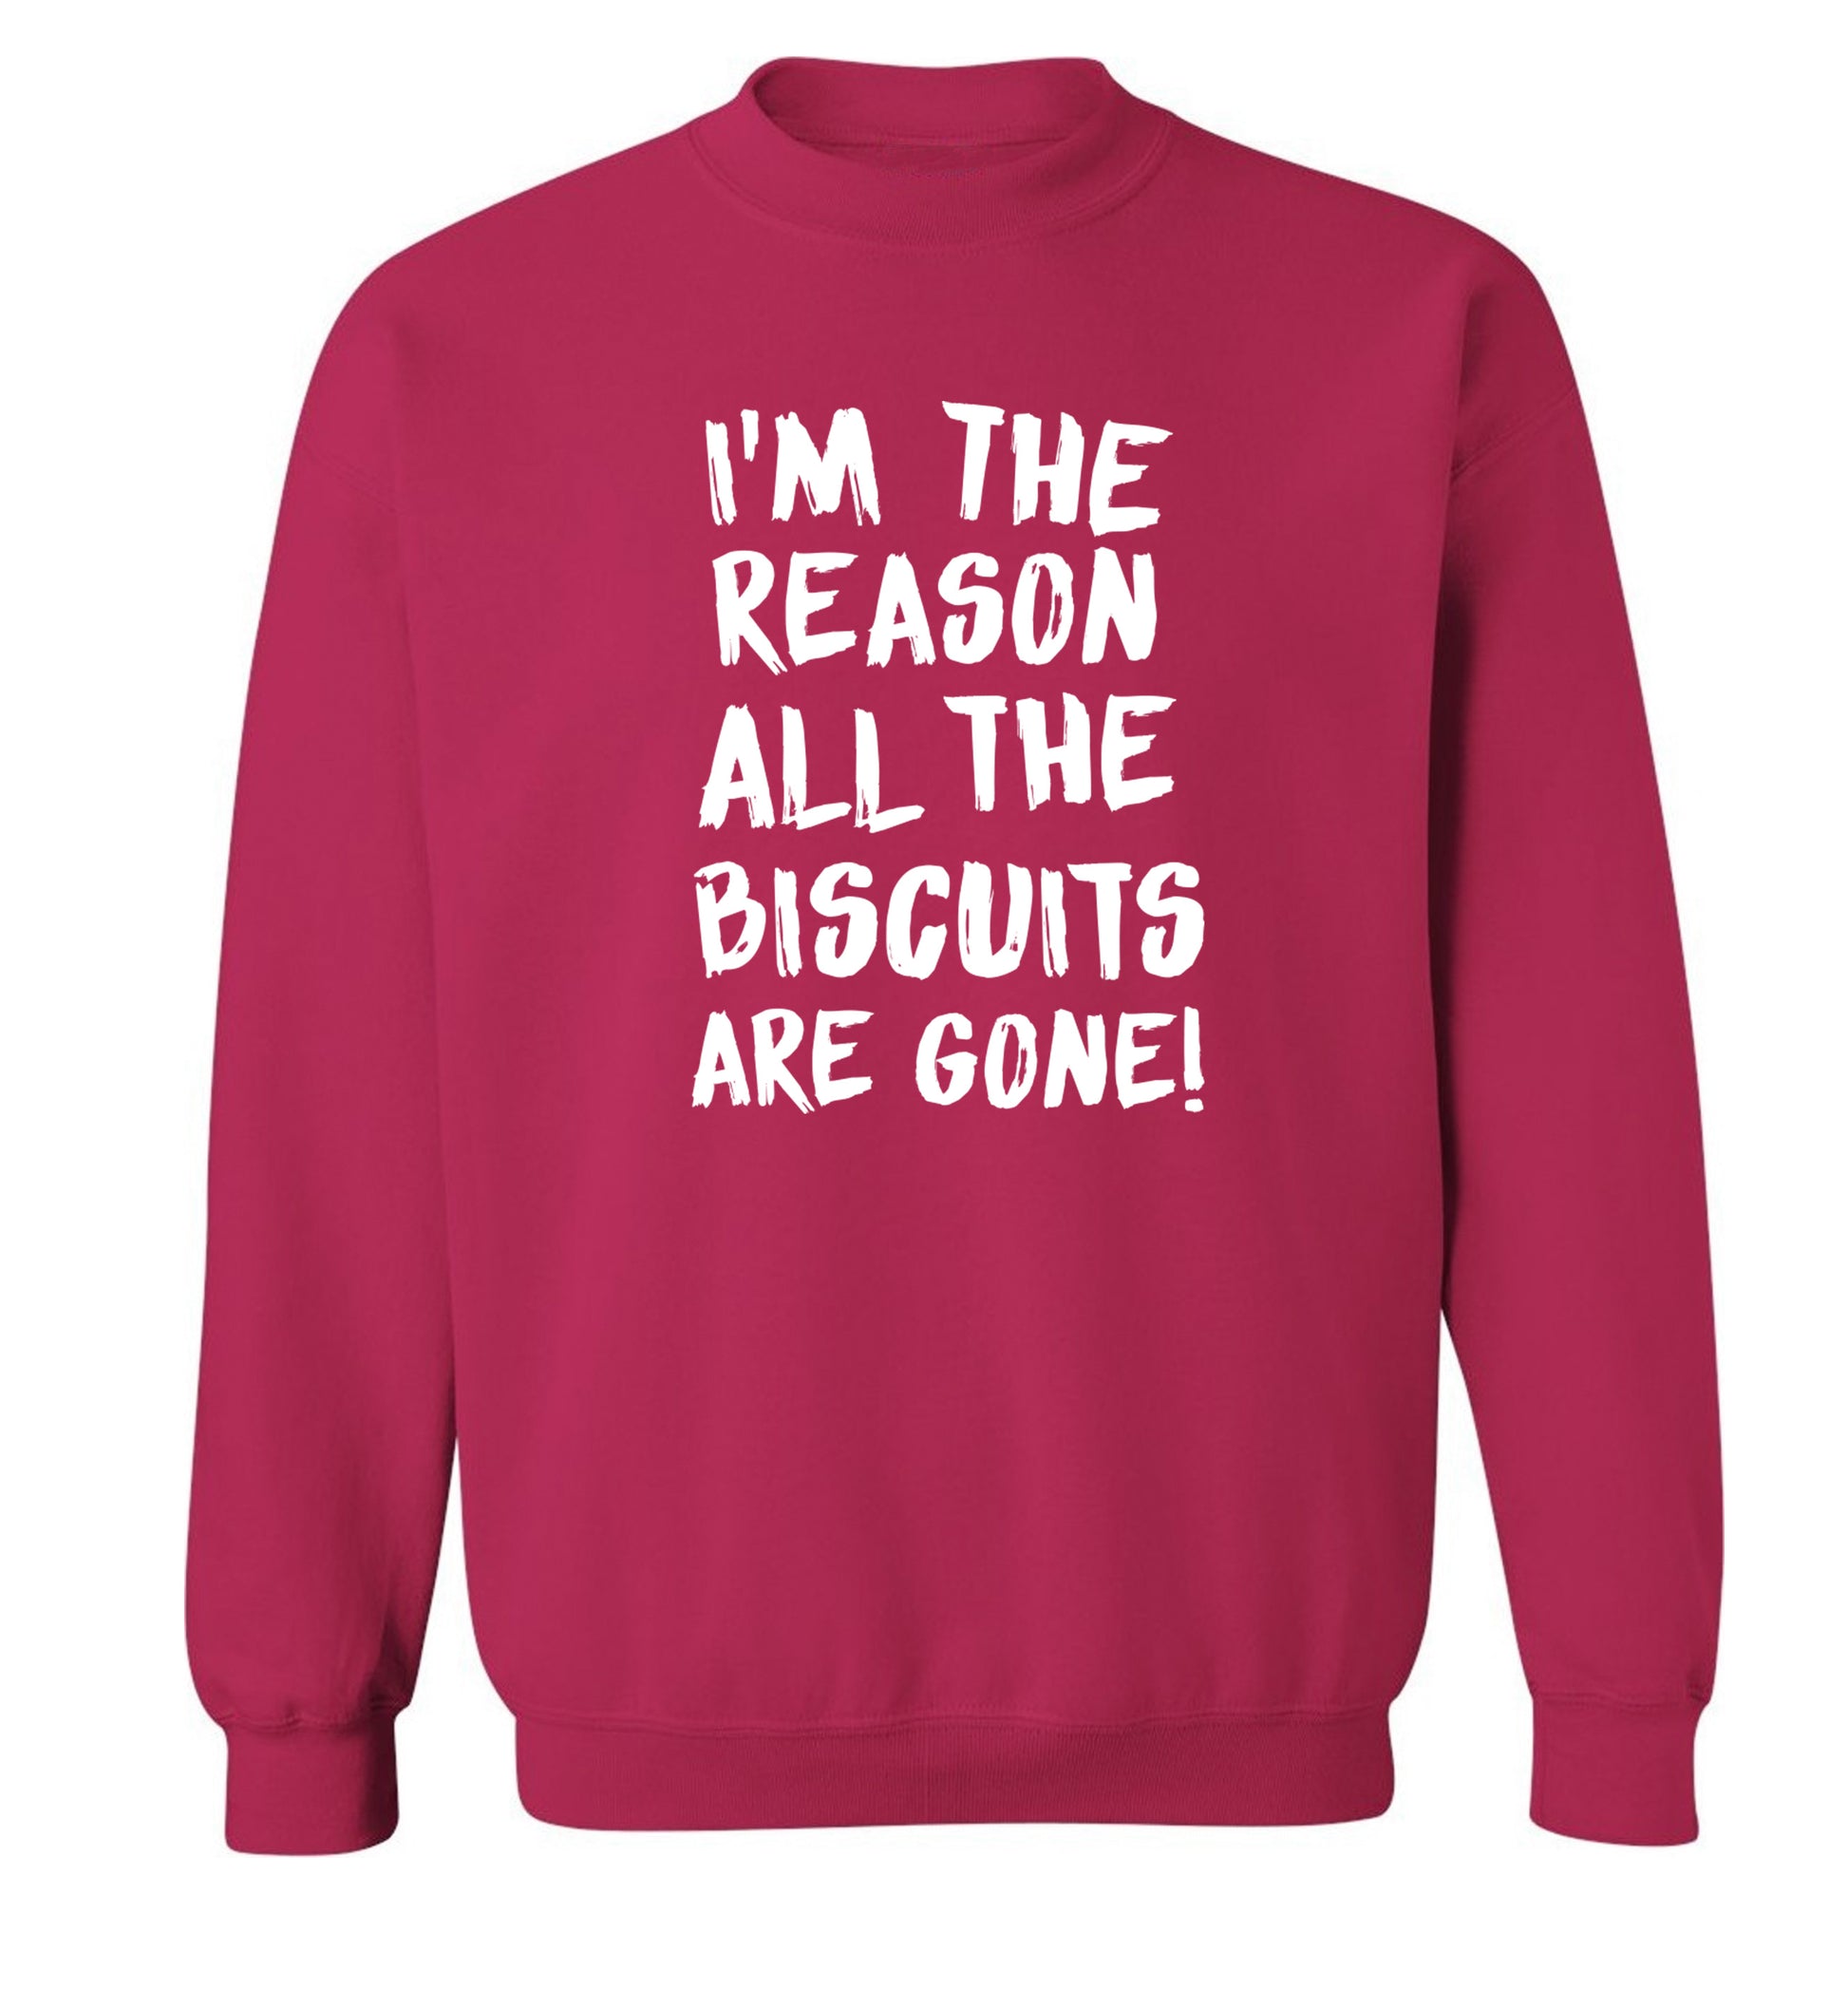 I'm the reason why all the biscuits are gone Adult's unisex pink Sweater 2XL